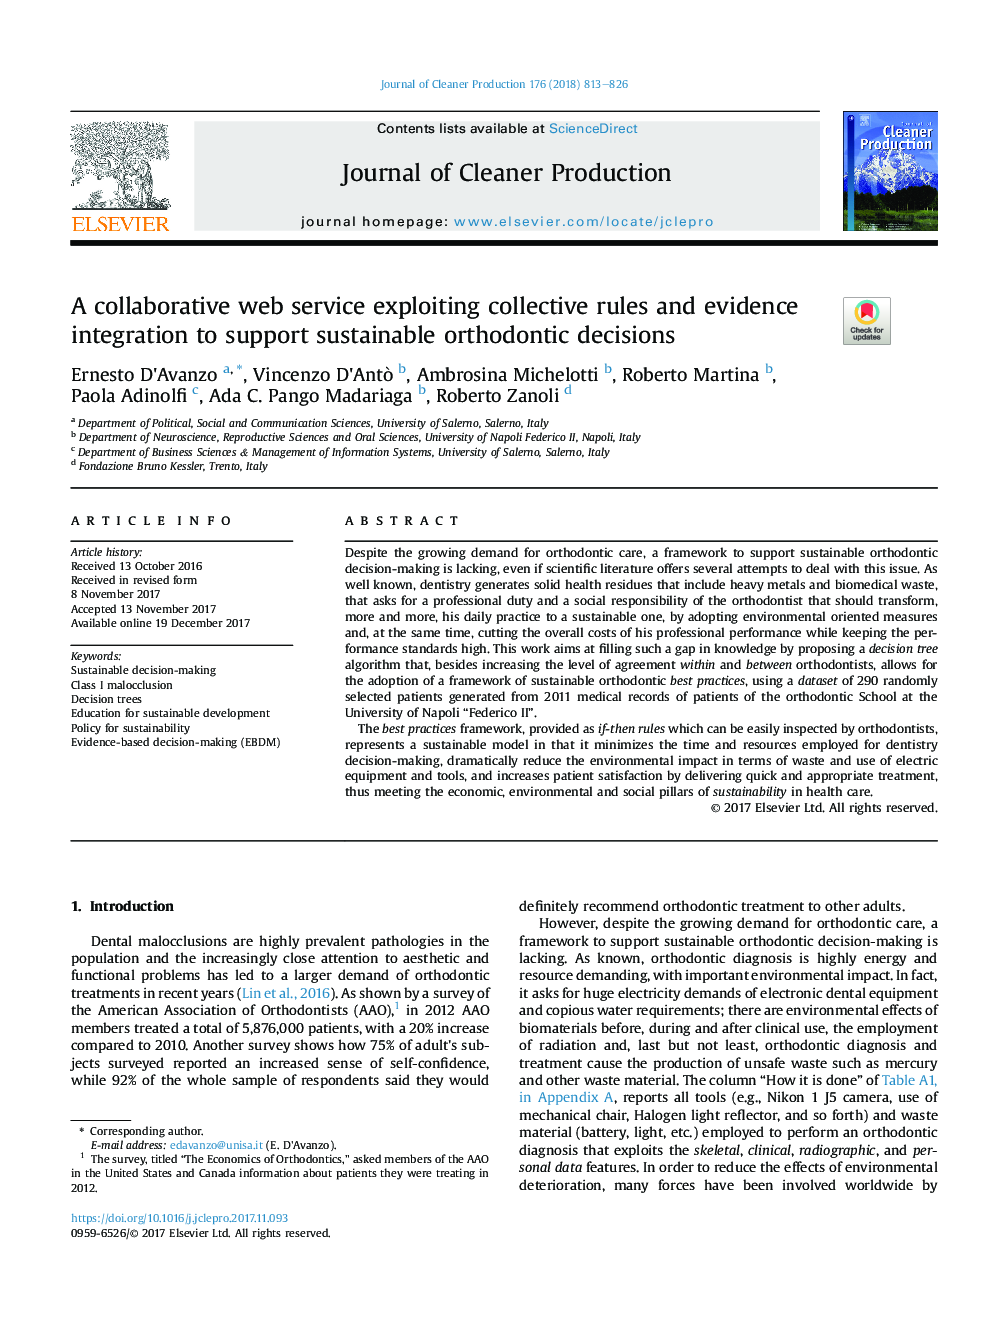 A collaborative web service exploiting collective rules and evidence integration to support sustainable orthodontic decisions